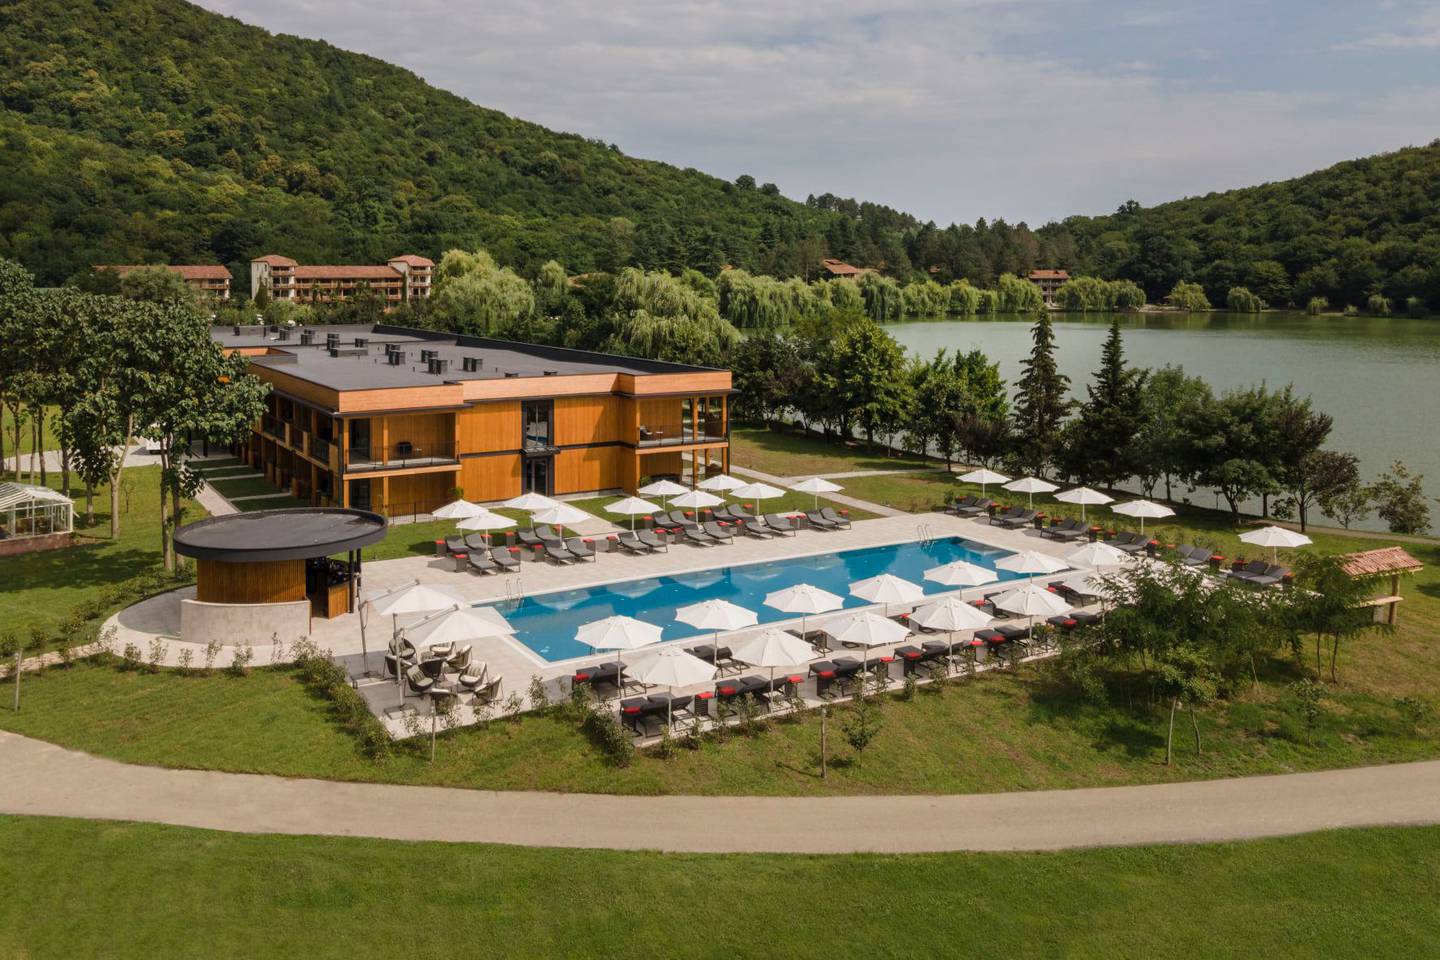 Peace and tranquility at the relaxing resort. Photo: Lopota Lake Resort & Spa